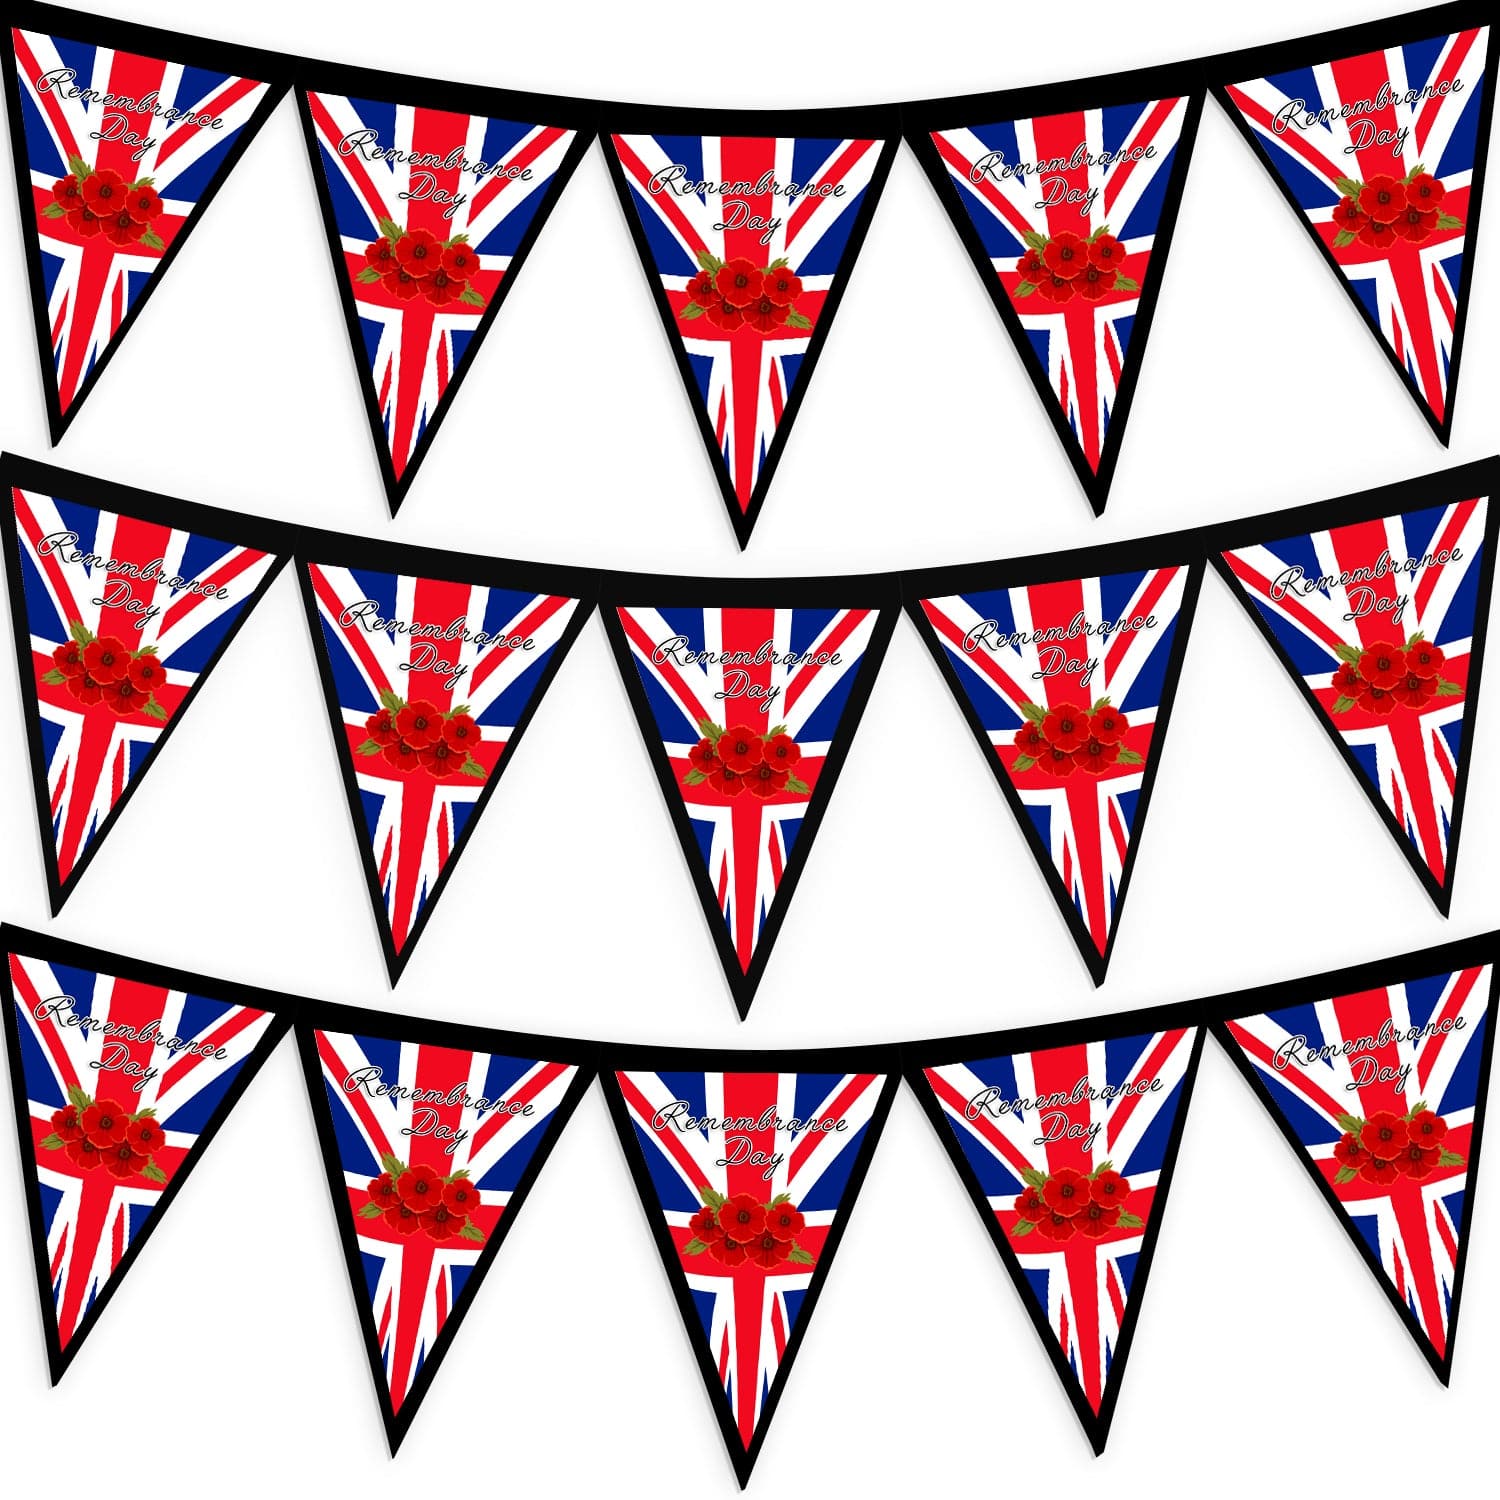 Remembrance Day - Poppy Flag - 3m Fabric Bunting 